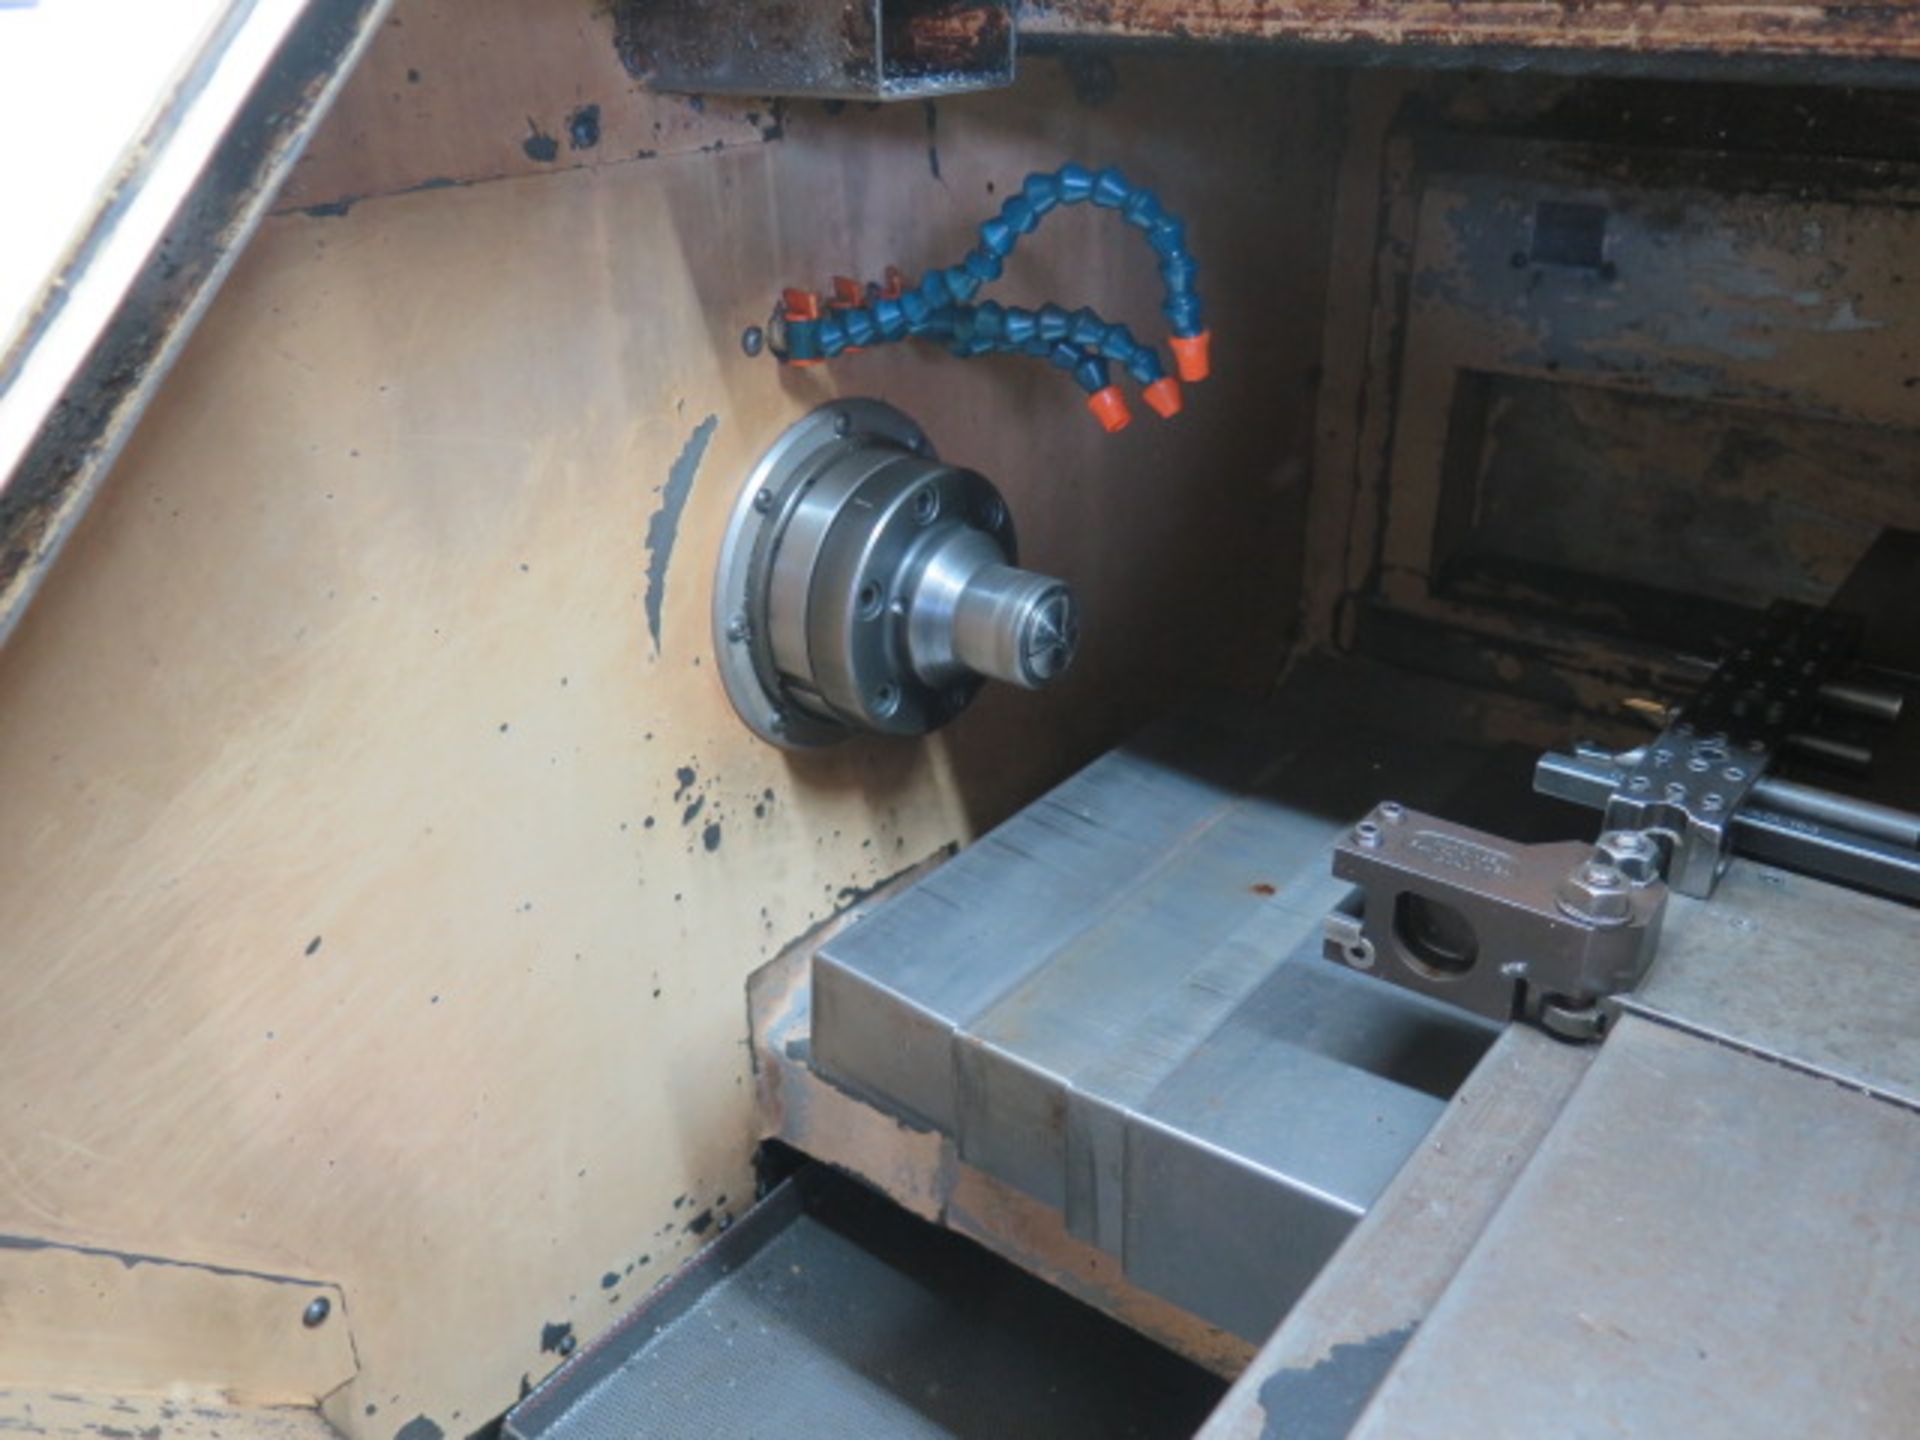 1995 American Way AW-100 CNC Cross Slide Lathe s/n 600L-109043 w/ American Way Controls, 5C Spindle, - Image 8 of 11